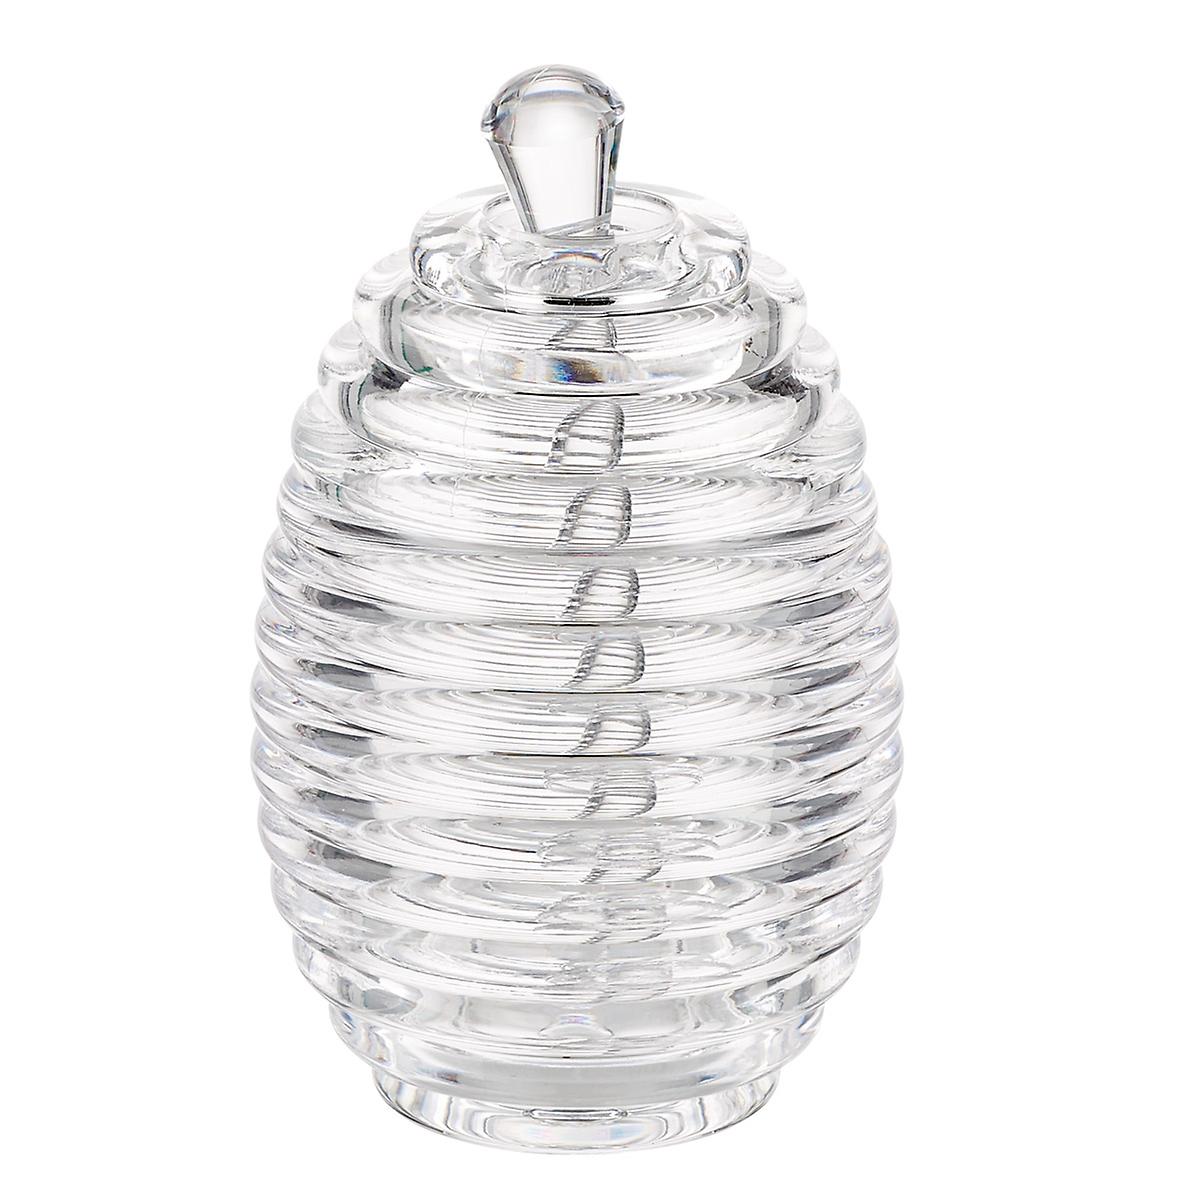 Honey Jar with Lid | The Container Store